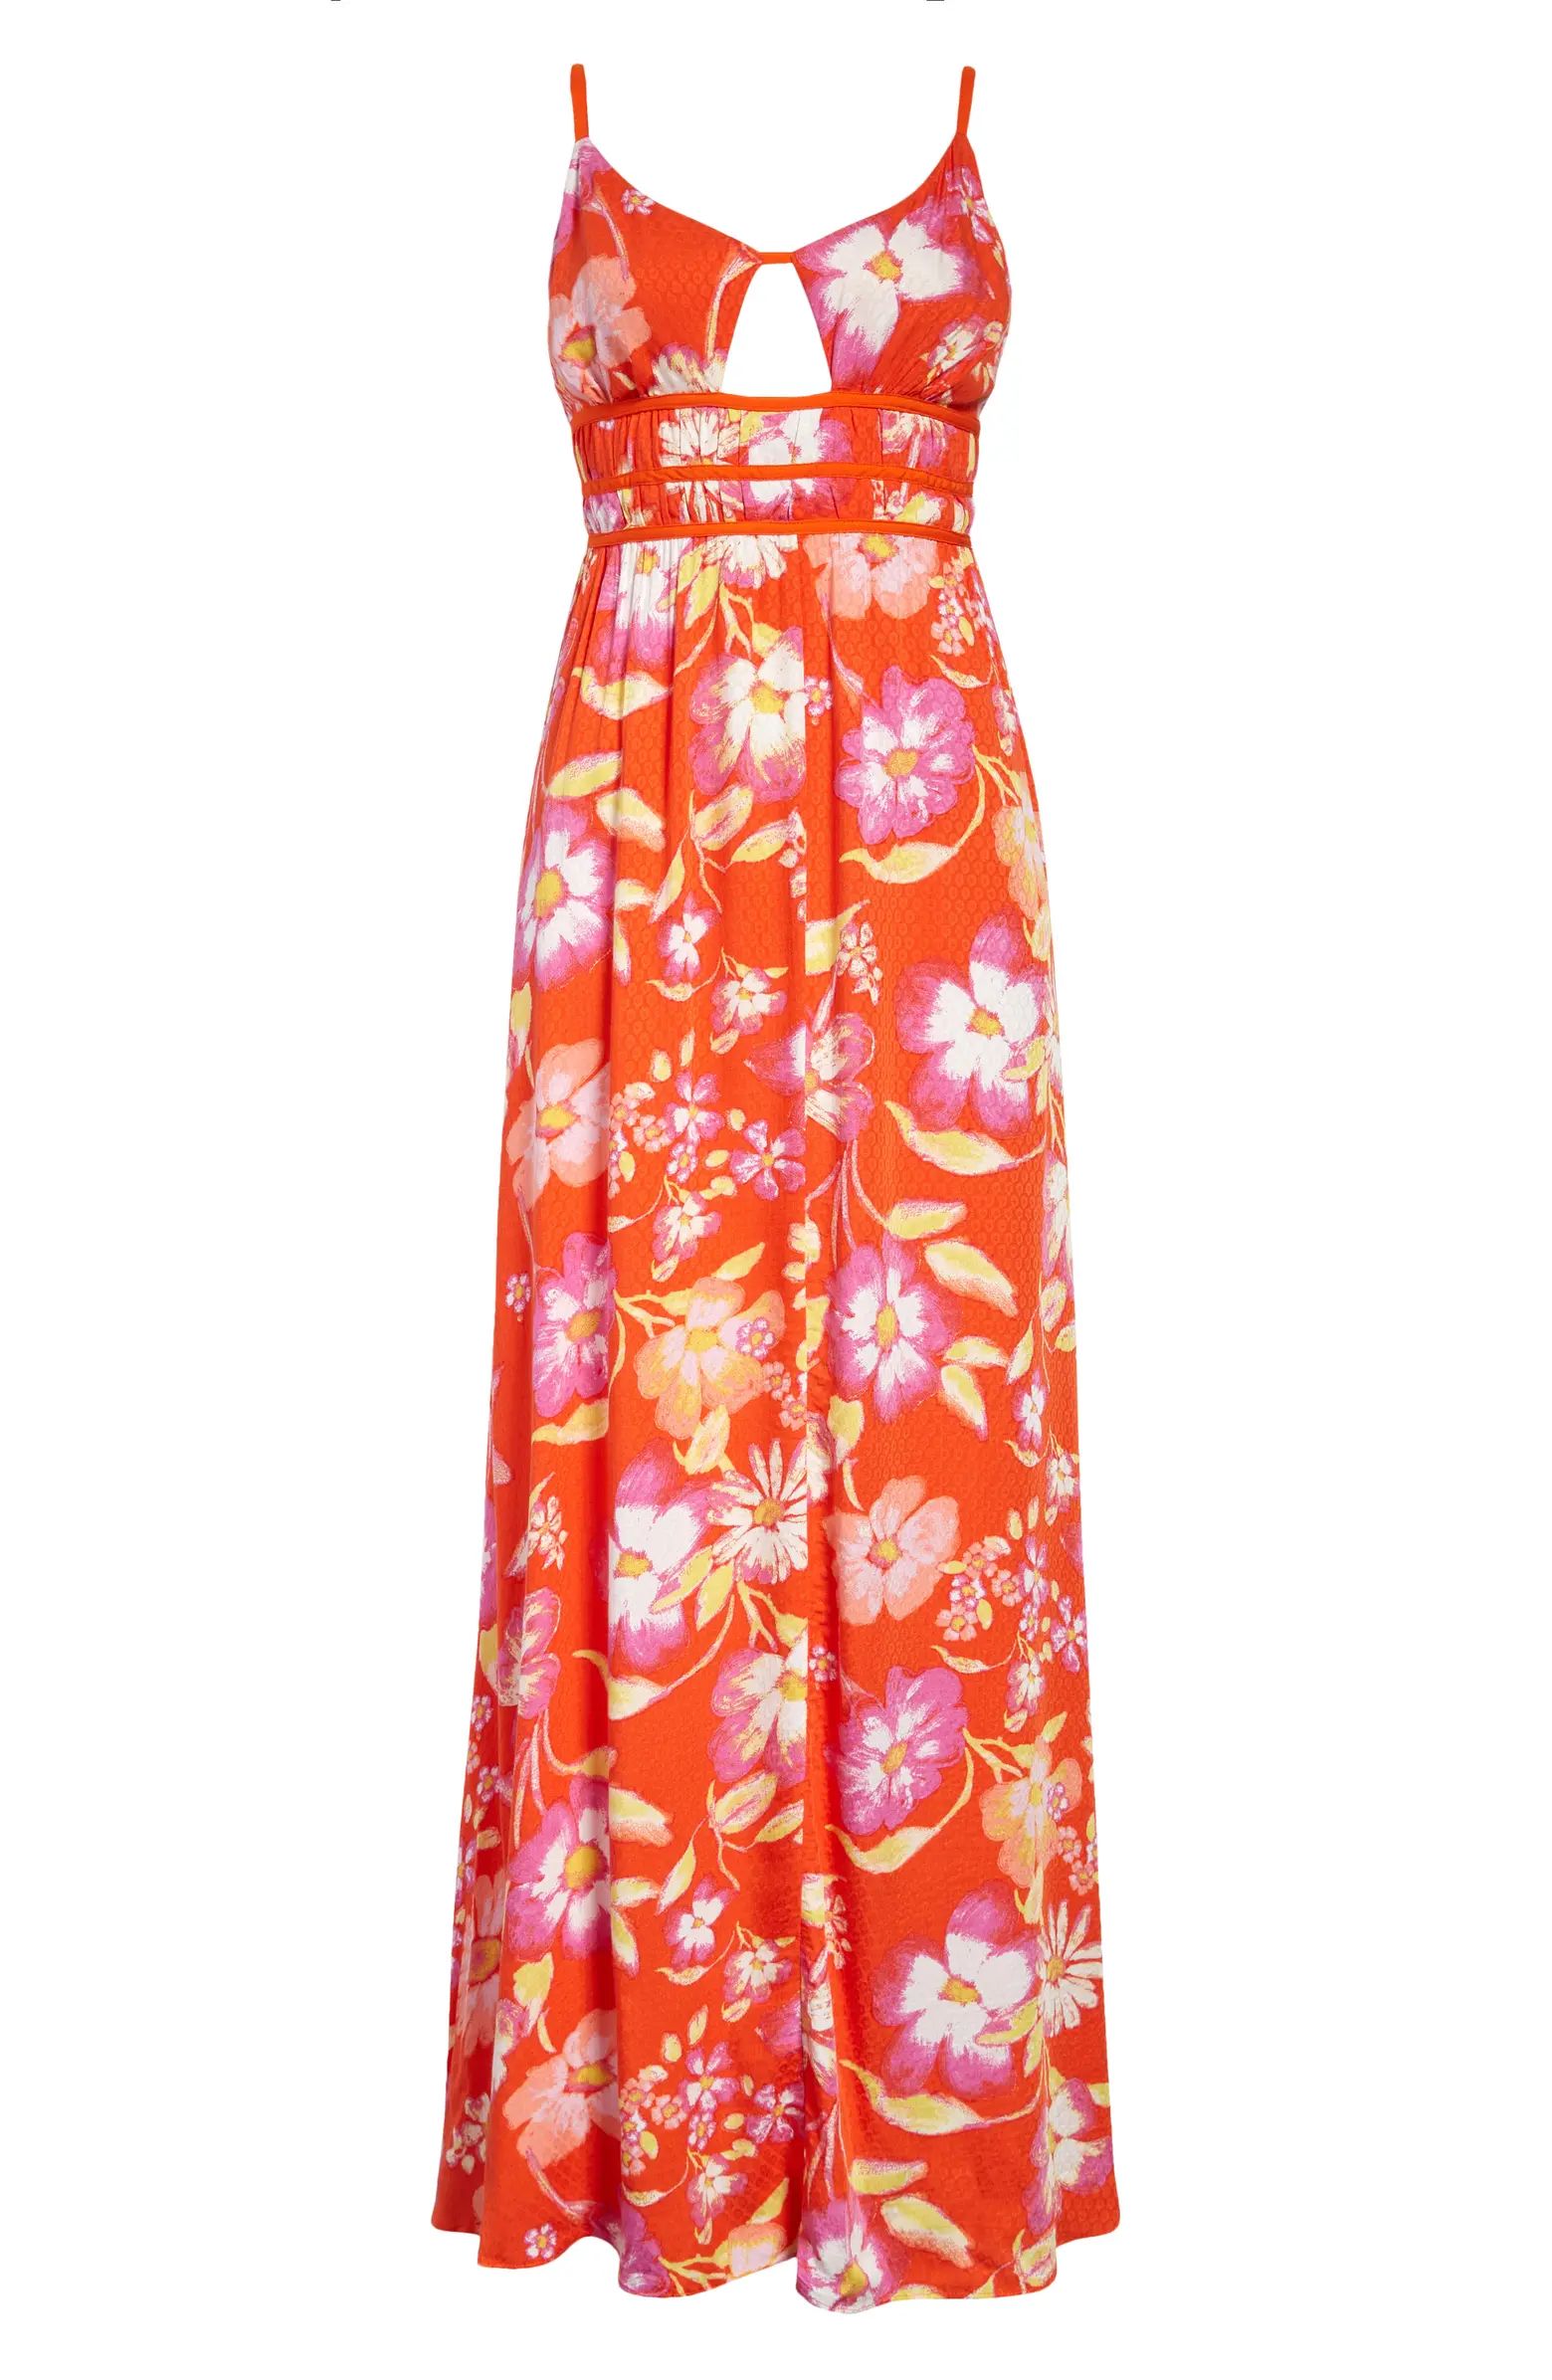 Wisteria Floral Sleeveless Maxi Dress | Nordstrom